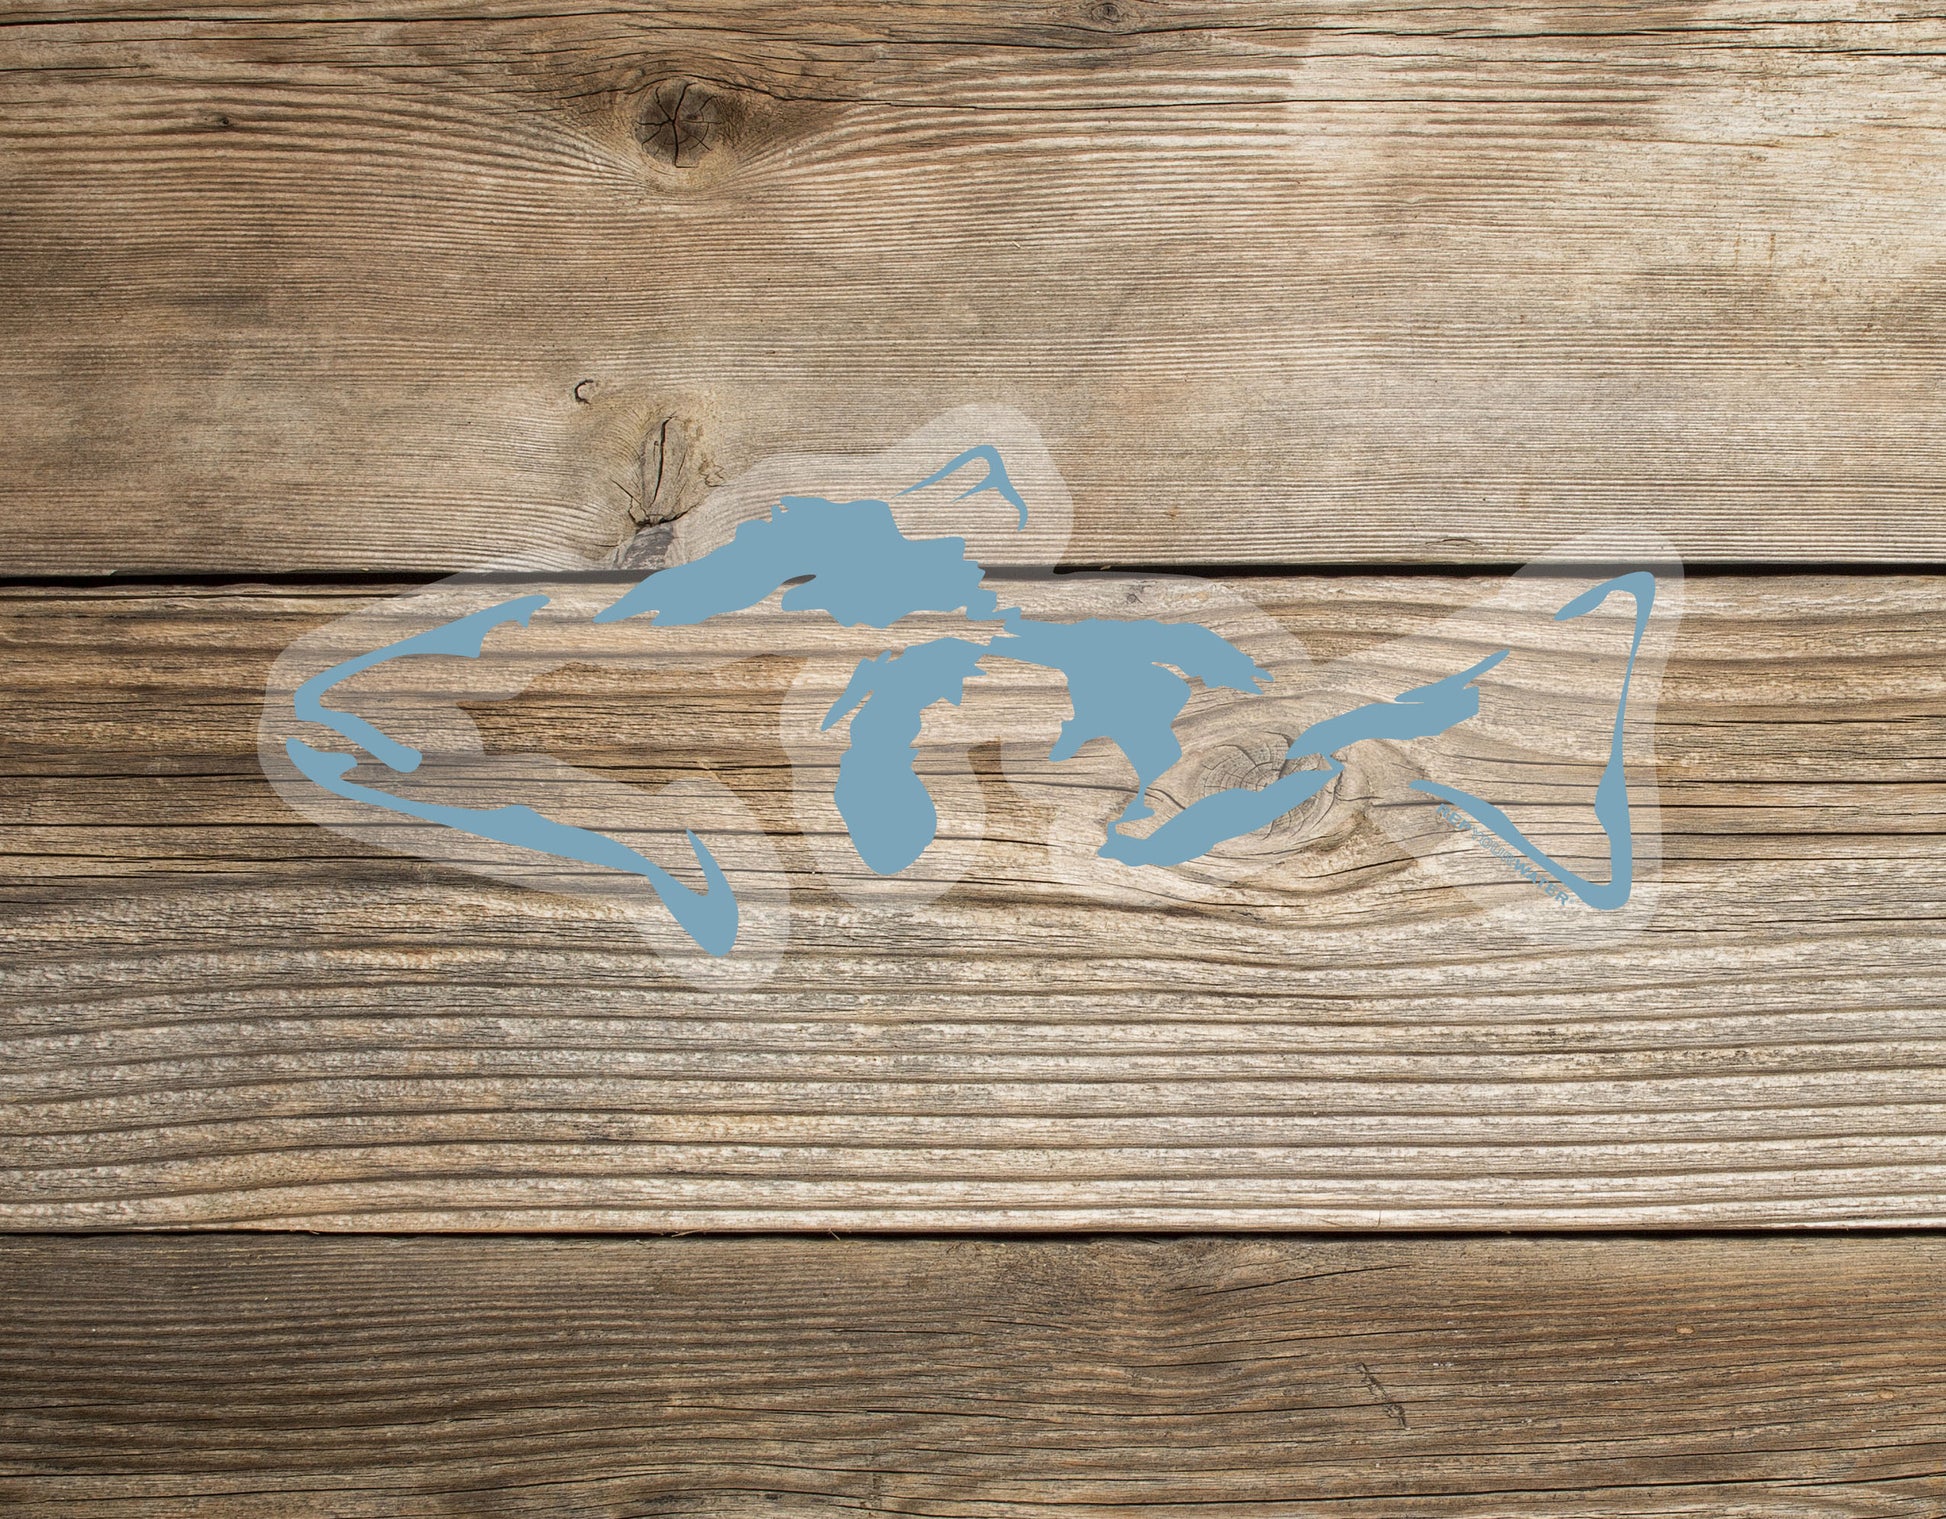 A sticker on a wood background. The sticker is a light blue shape of the great lakes combined with a fish head and fins to create the shape of a trout.